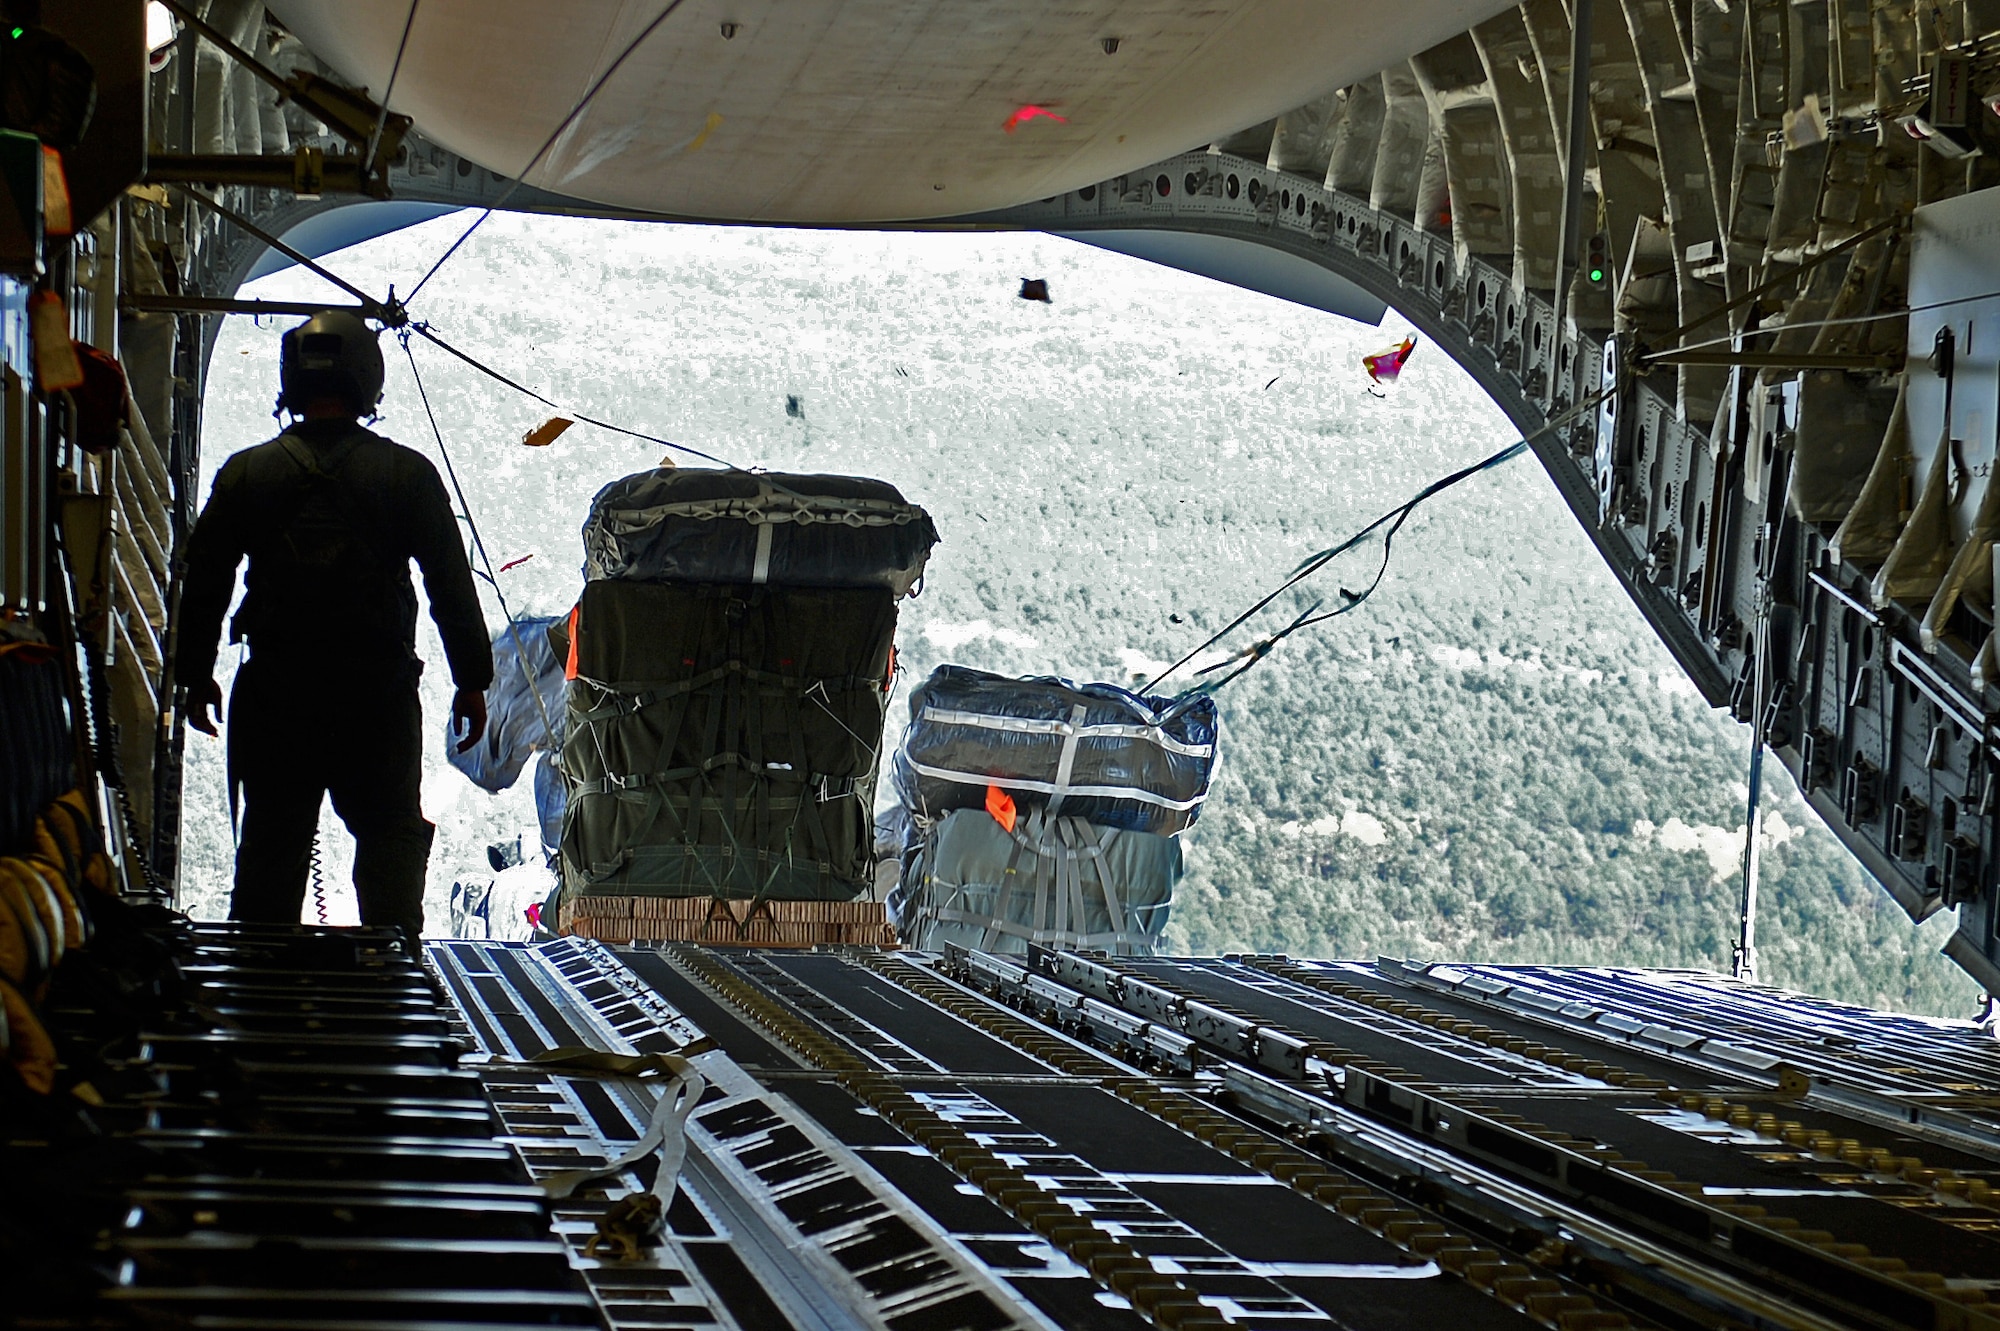 Cargo for the 82nd Airborne Division is air-dropped out the back of a C-17 Globemaster III, Oct. 29, 2015, over North Carolina during Joint Operation Access Exercise 16-1. The 82nd ABD was training as part of a global response force, which is a joint force that can deploy and have service members on the ground anywhere in the world within 96 hours. (U.S. Air Force photo/Senior Airman Divine Cox)